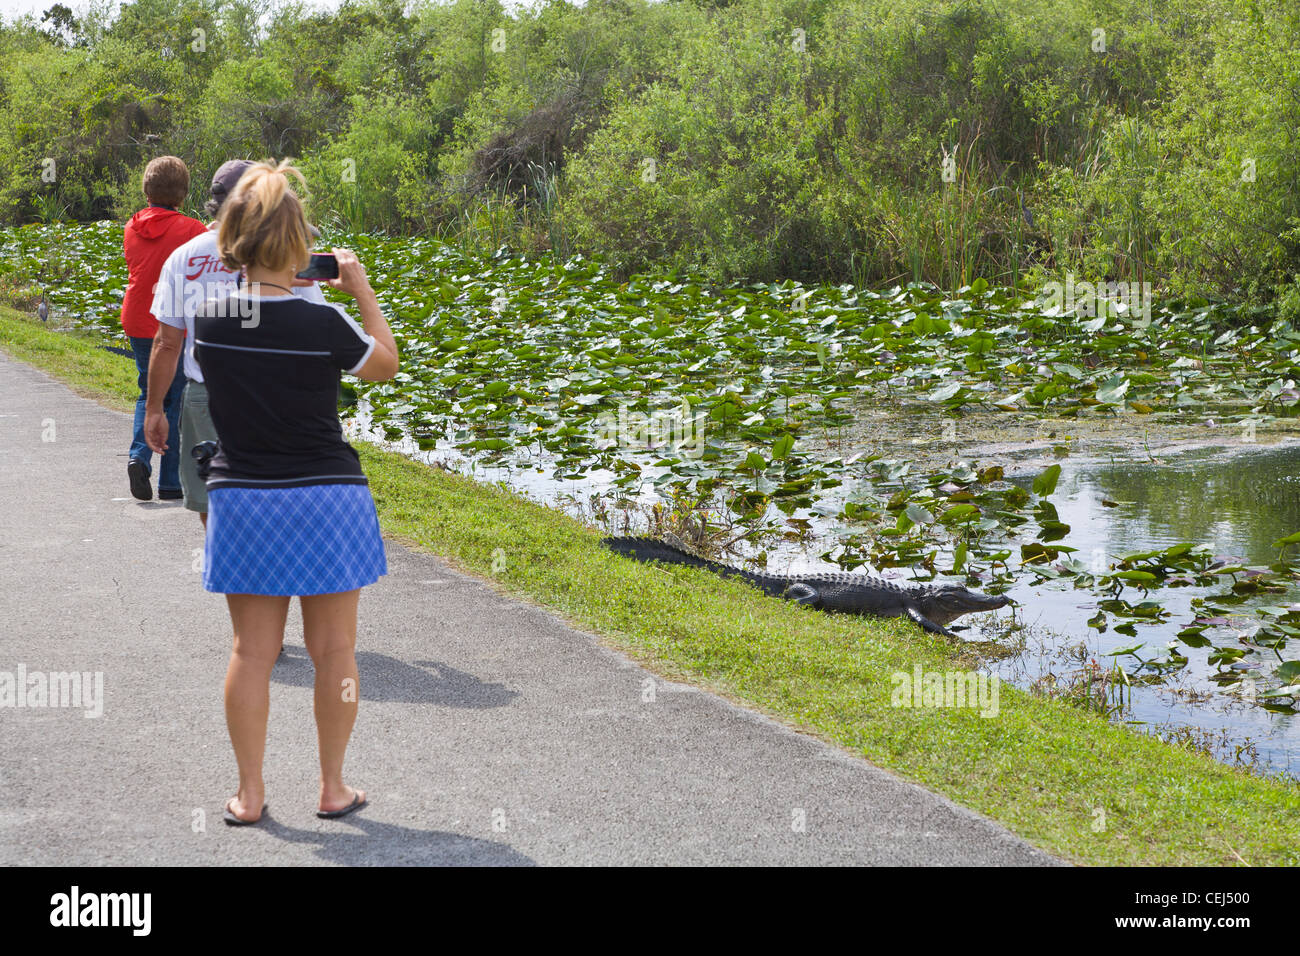 People watching Alligator in the Shark Valley section the Everglades National Park Florida Stock Photo